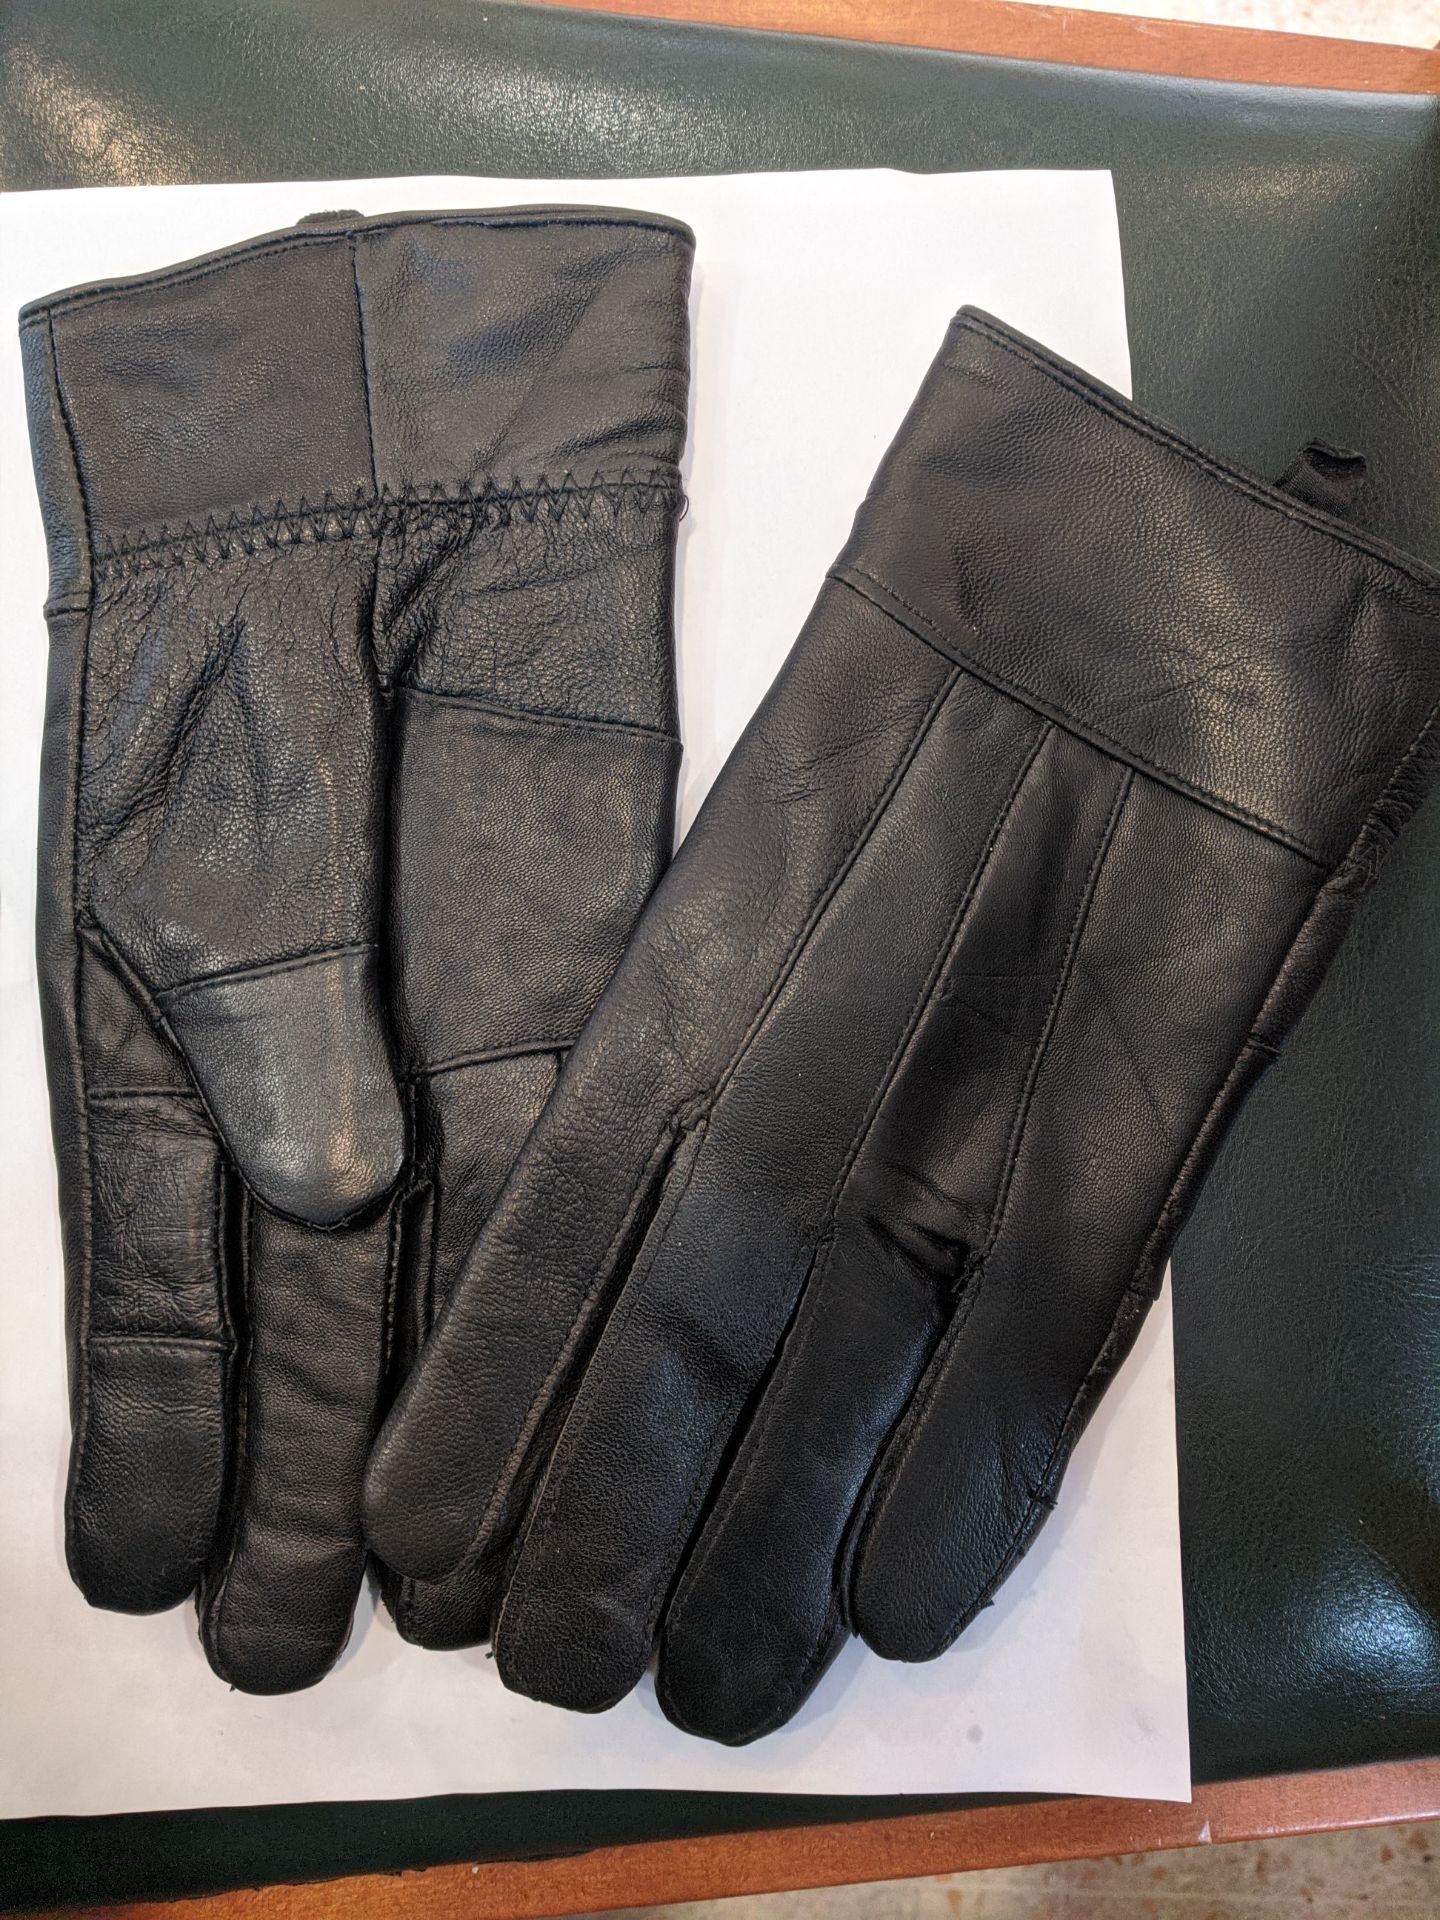 100 PAIRS OF NEW AND SEALED THINSULATE 3m LEATHER GLOVES, FLEECE LINED INSIDE, MEDIUM *PLUS VAT* - Image 2 of 4